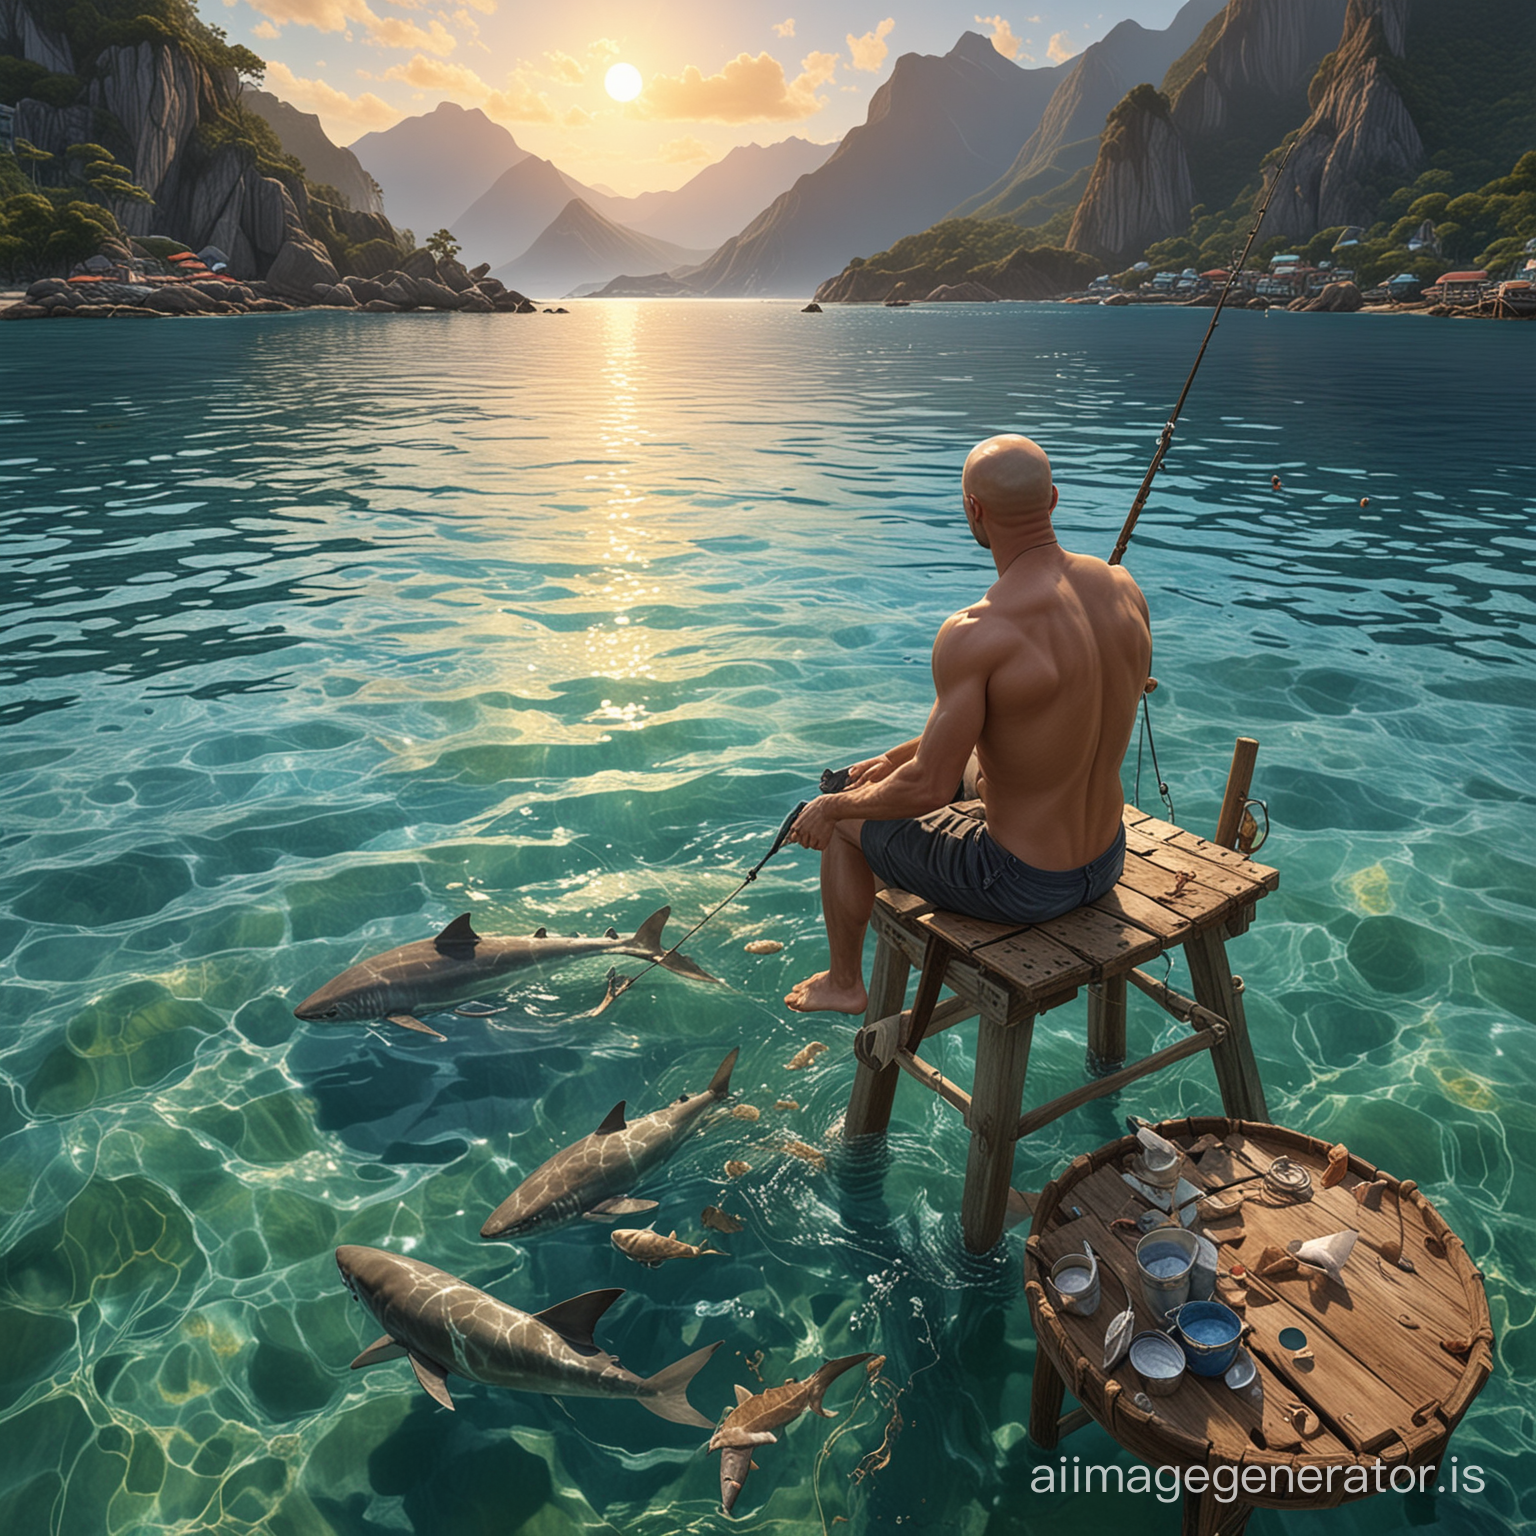 From far top side, uplifting 3D view. Tropical environment med beach, mountains, fishing boats and ocean. a handsome fit bare chested bald man with short silver hair on sides and with a tanned face. sits on a fishing stool at a wooden pier, fishing rod in hand, there is a bucket full of fish, a large shark visible under surface in the clear green-blue water. sunset. alcohol ink, fluid watercolor, oil painting wet. 4K HD digital image